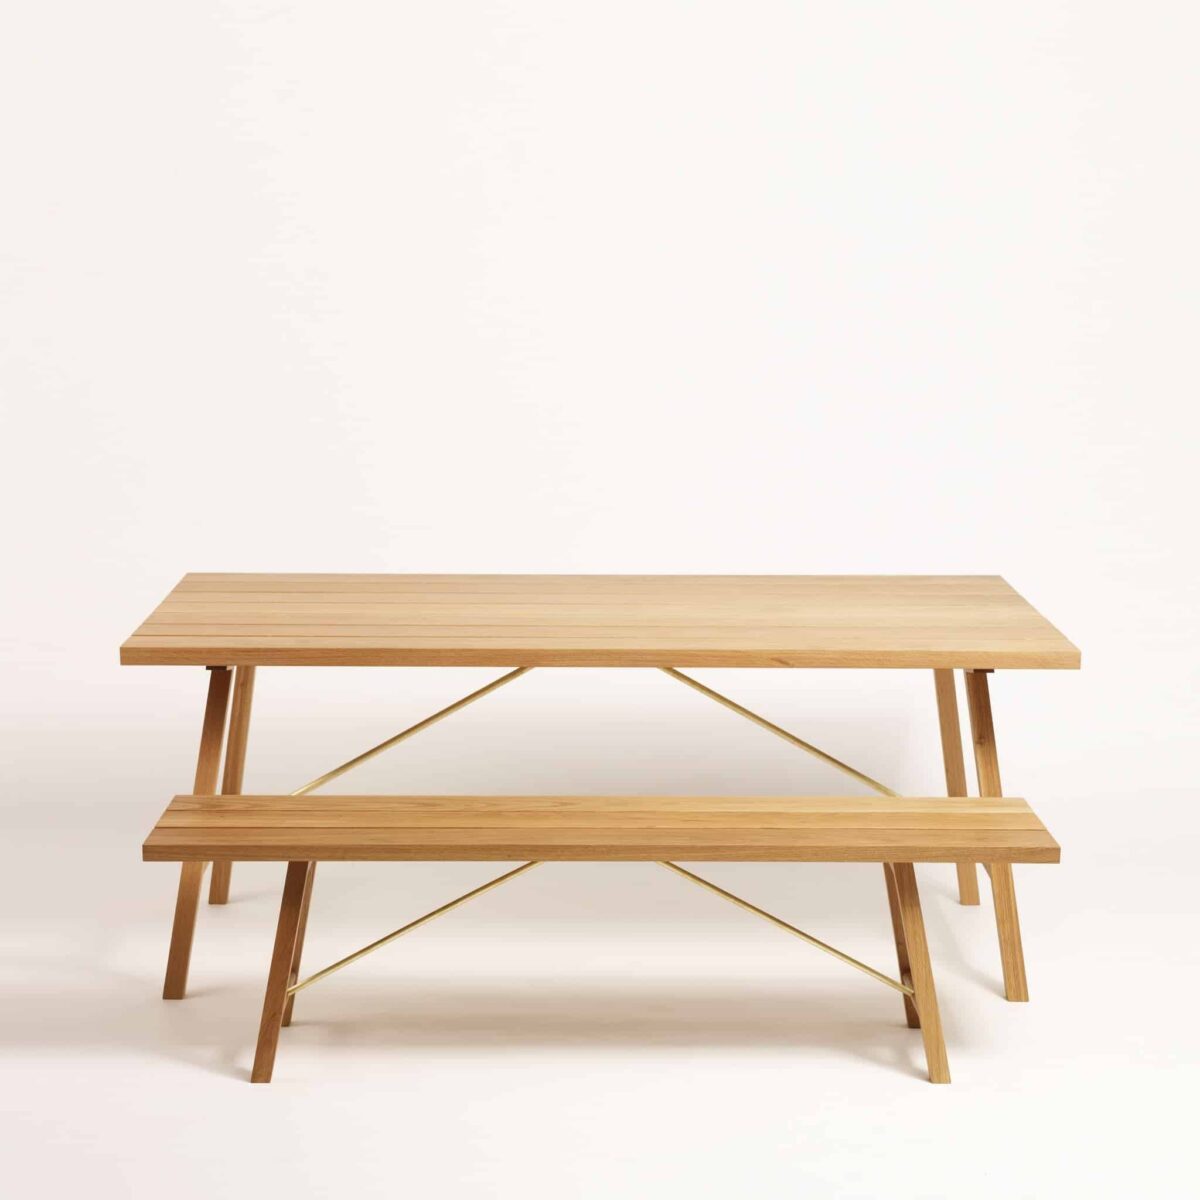 series-two-outdoor-table-another-country-002